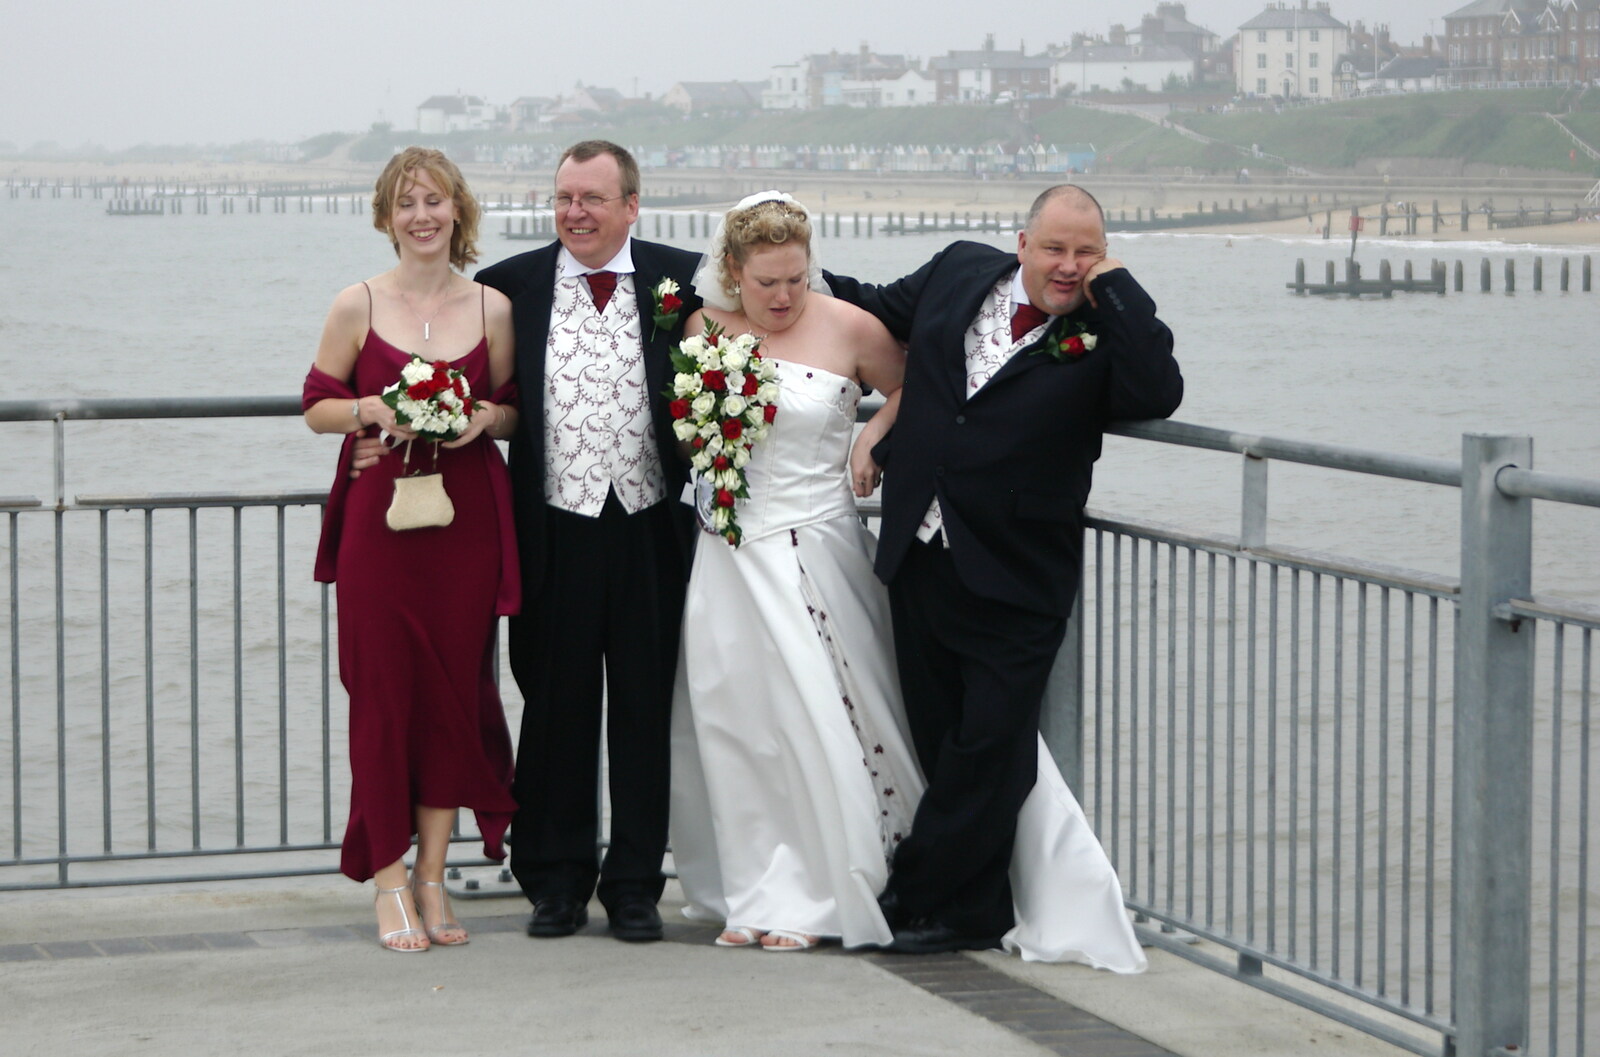 A group photo from Sally and Paul's Wedding on the Pier, Southwold, Suffolk - 3rd September 2005